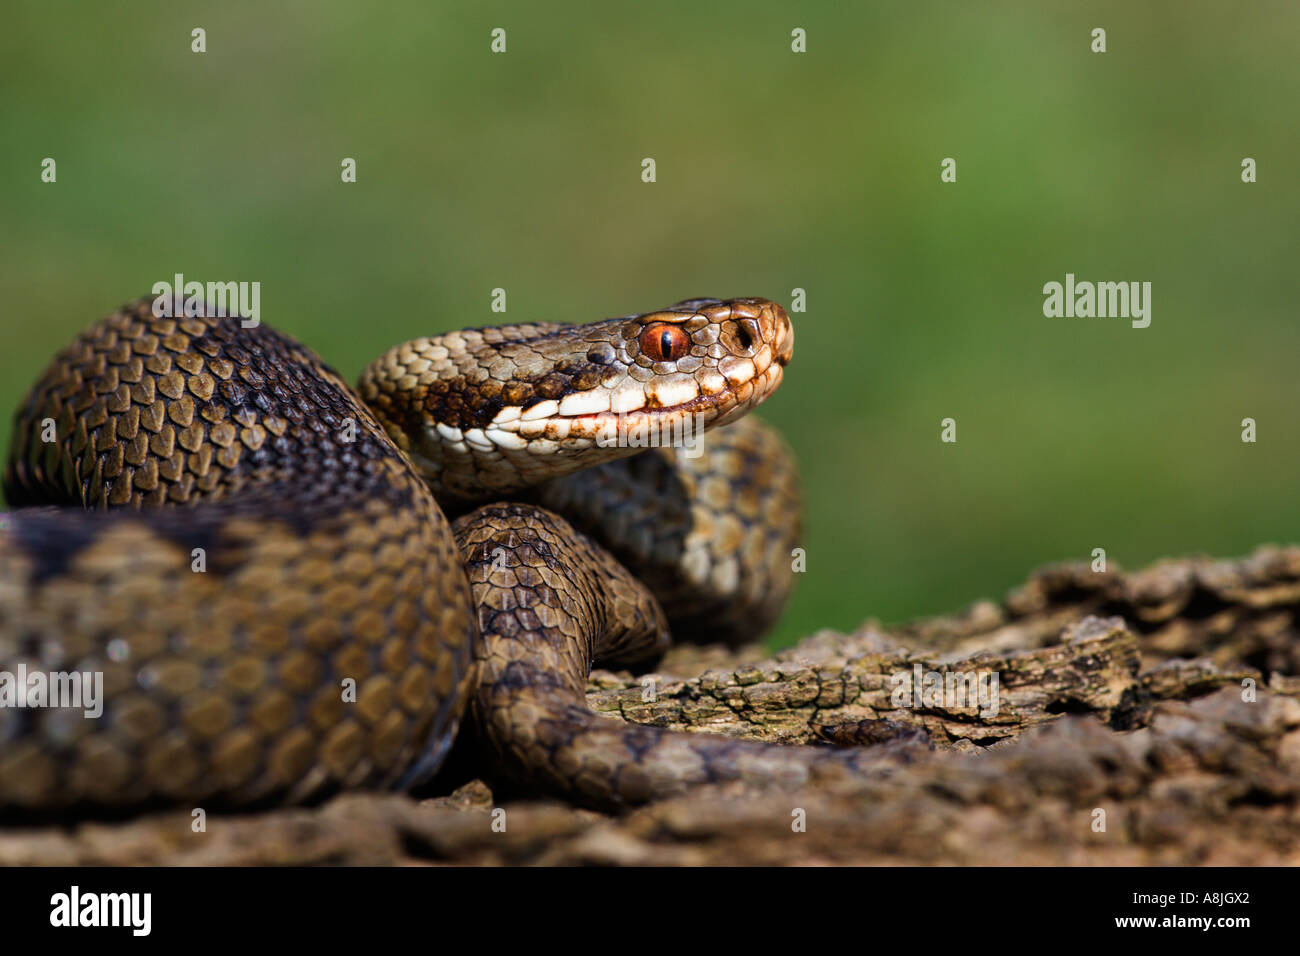 Adder Vipera berus on log looking alert ready to strike leicestershire with nice out of focus background Stock Photo